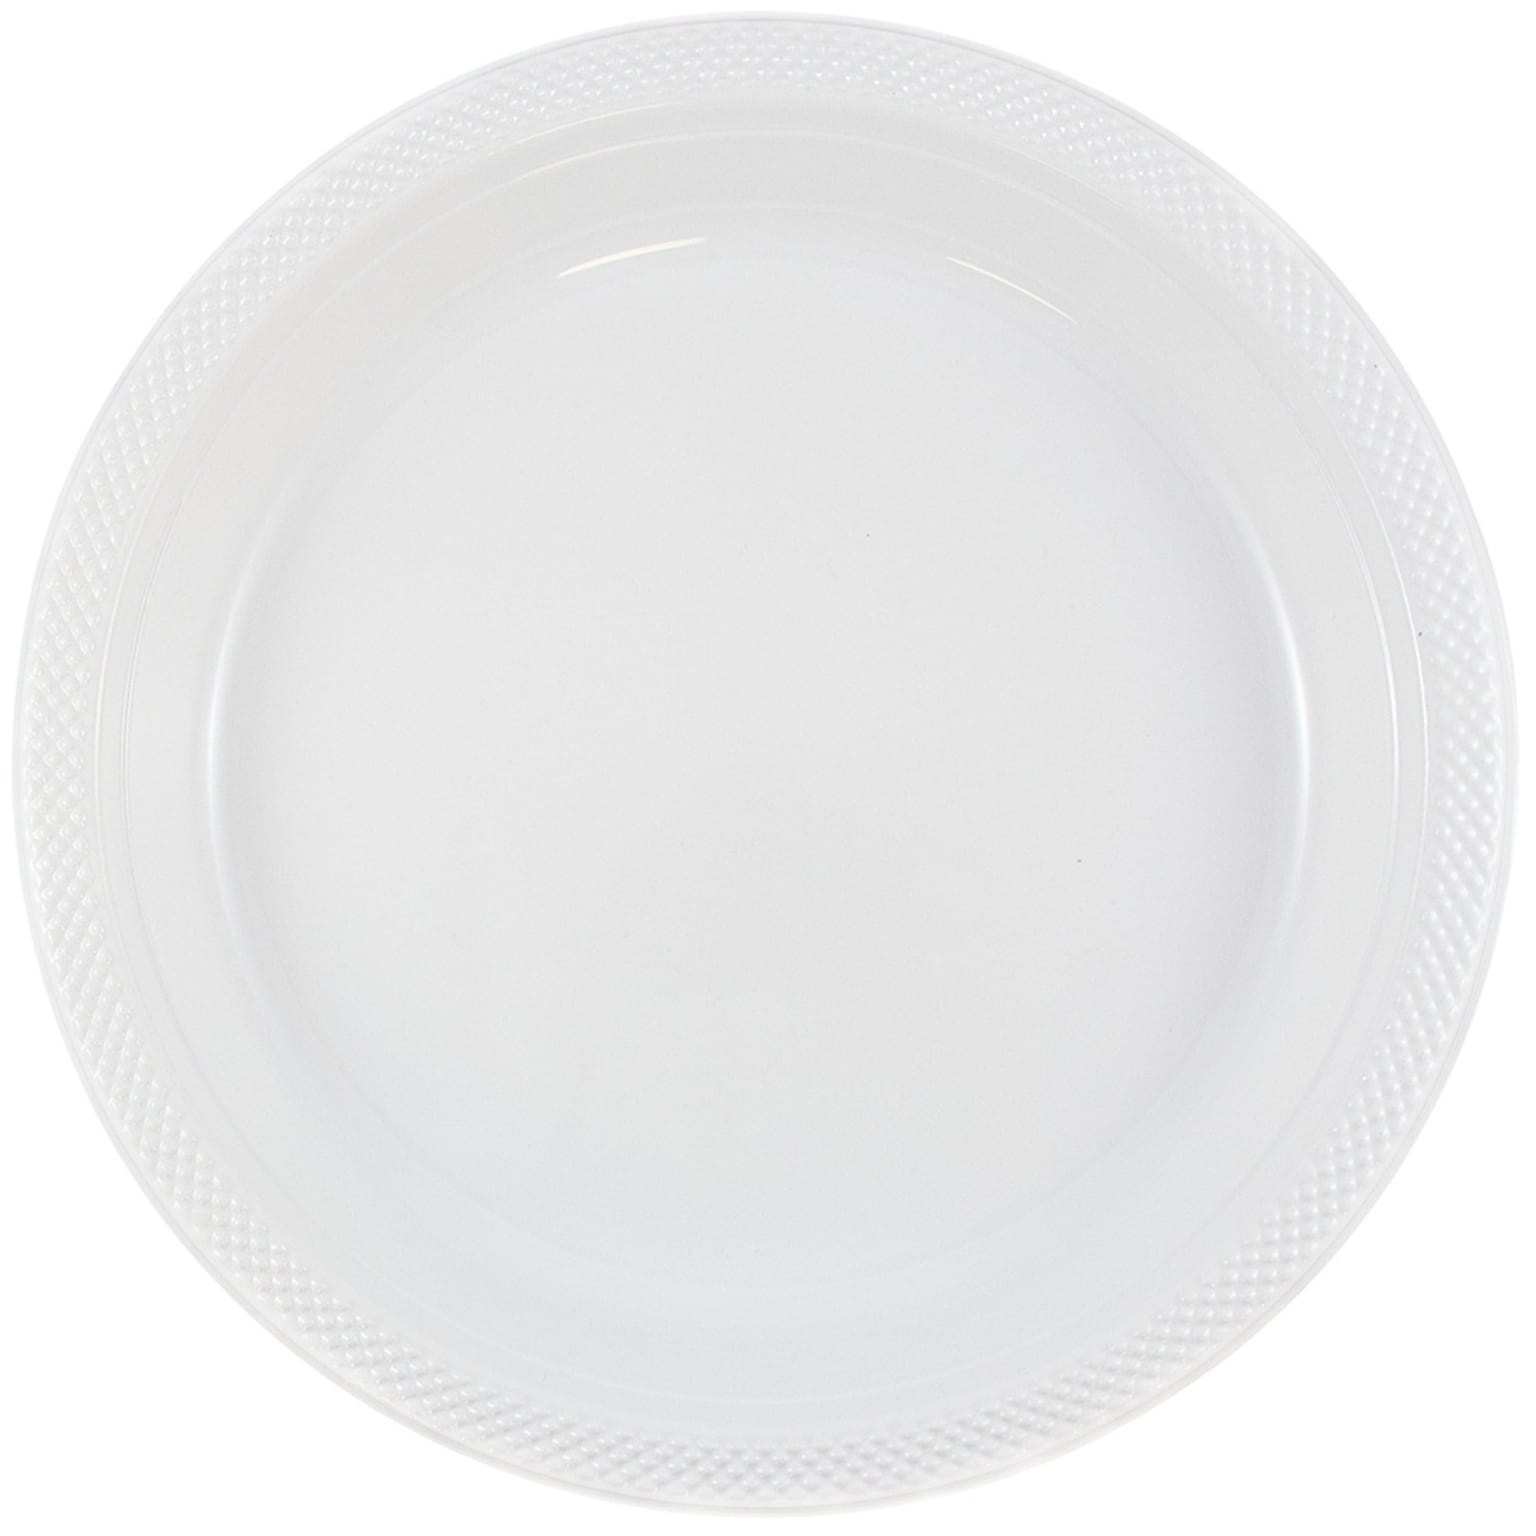 JAM PAPER Round Plastic Party Plates, 9, White, 2/Pack (925532691)